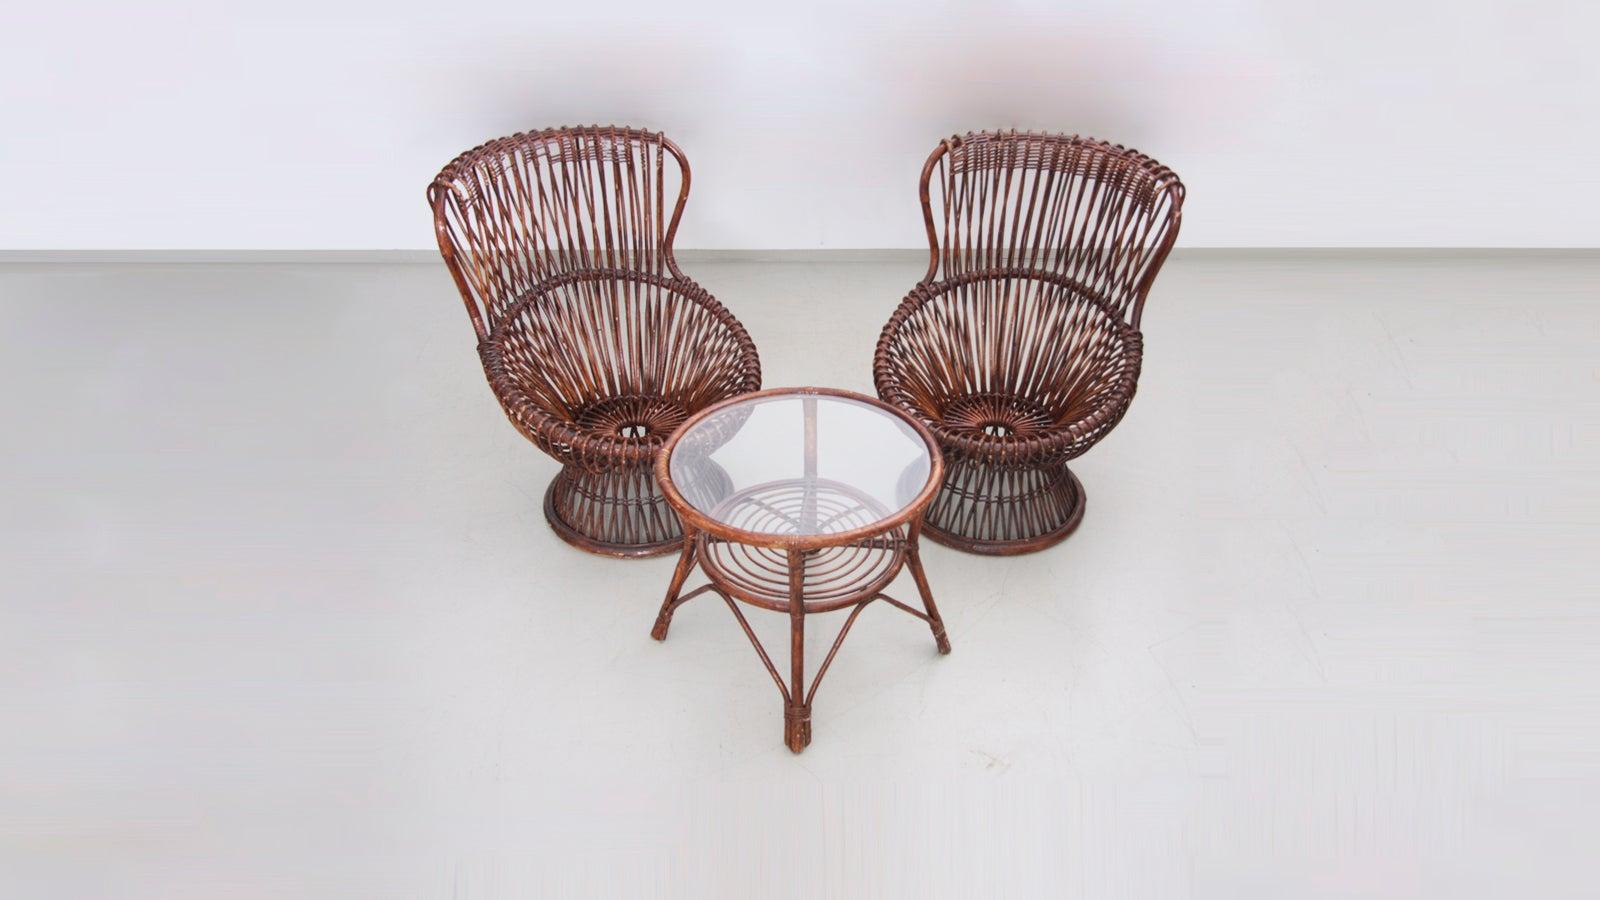 Rare set of two armchairs with rattan frame. Small round table available with glass top.


